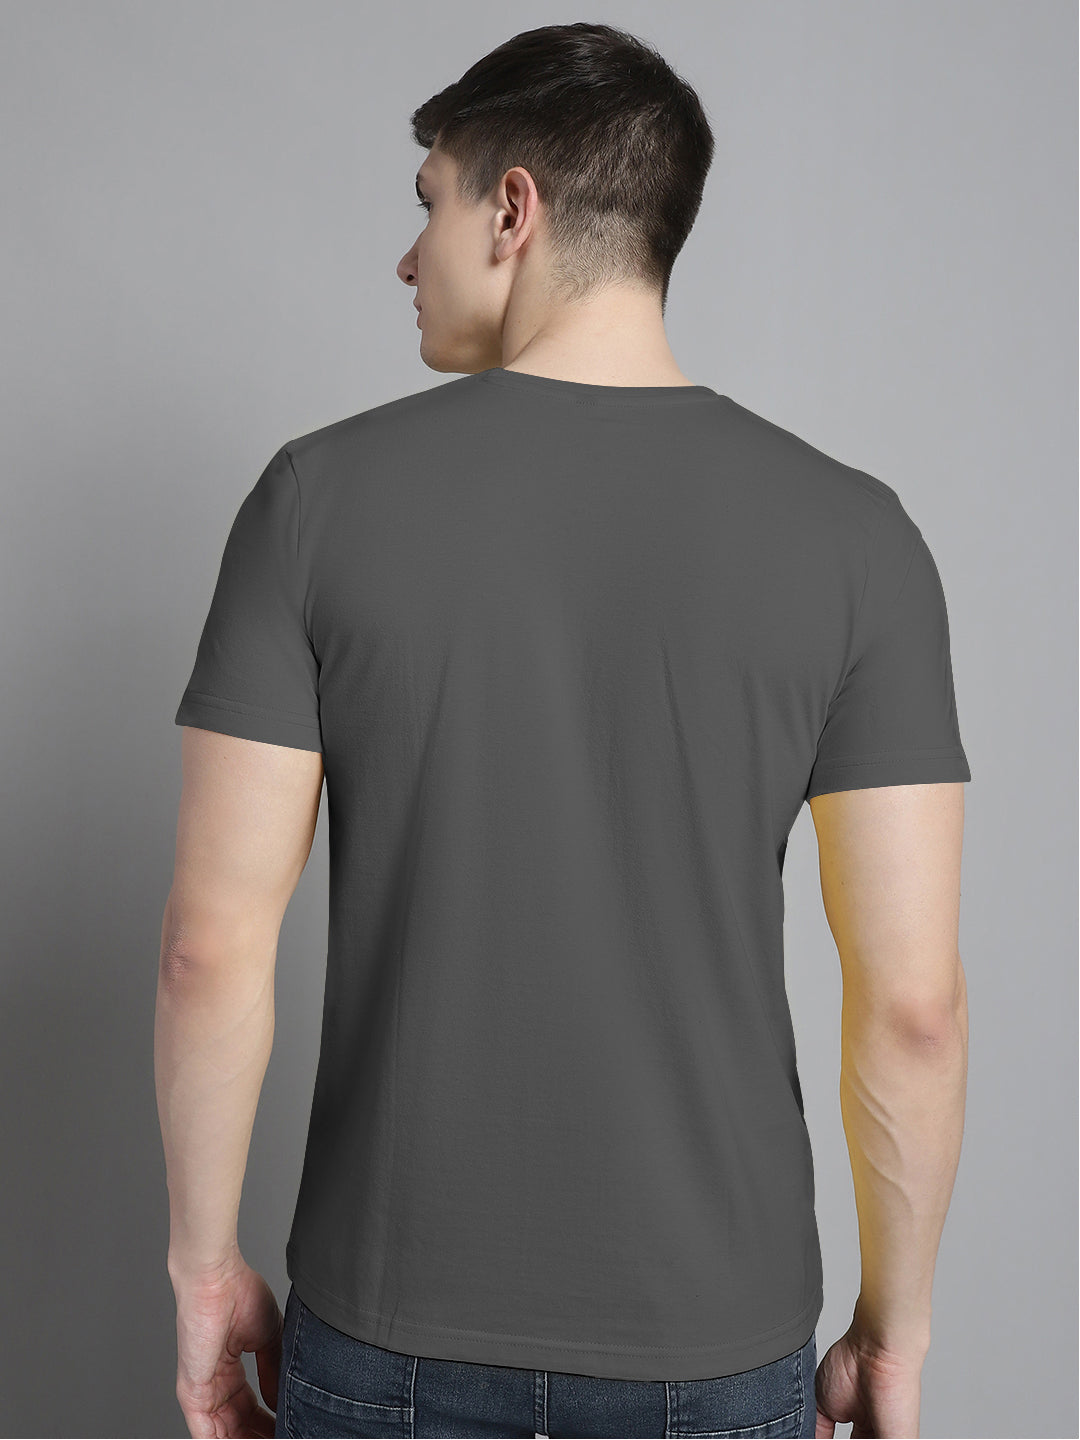 Fbar What Ever Cotton Round Neck T-Shirt - Friskers